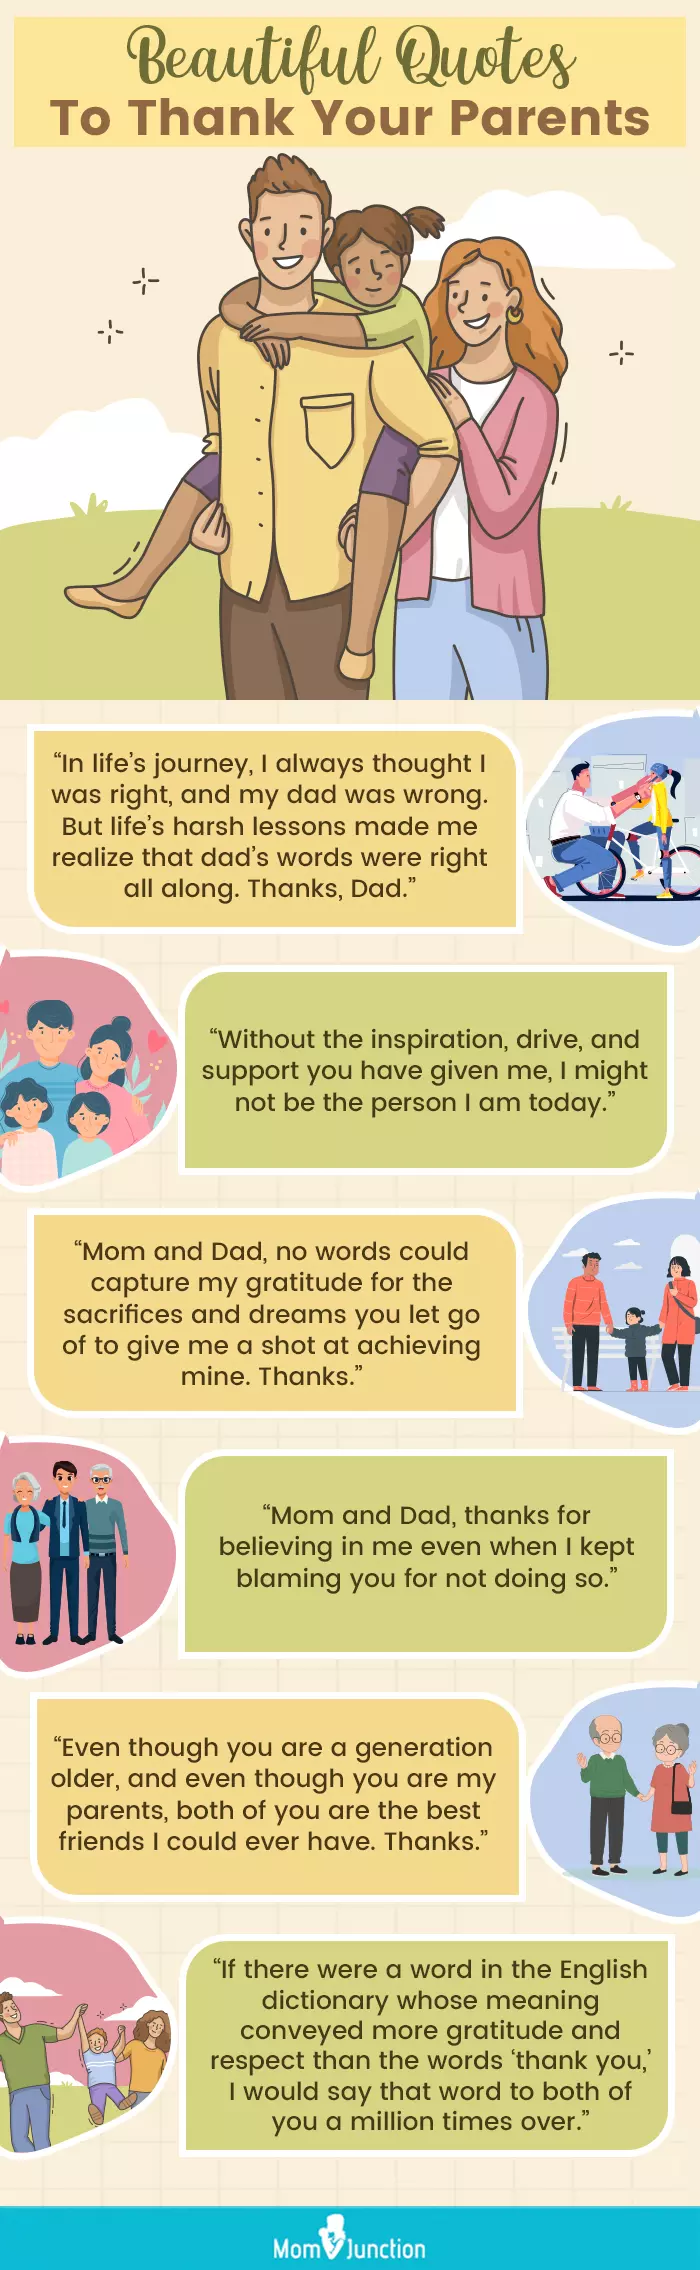 beautiful quotes to thank your parents (infographic)